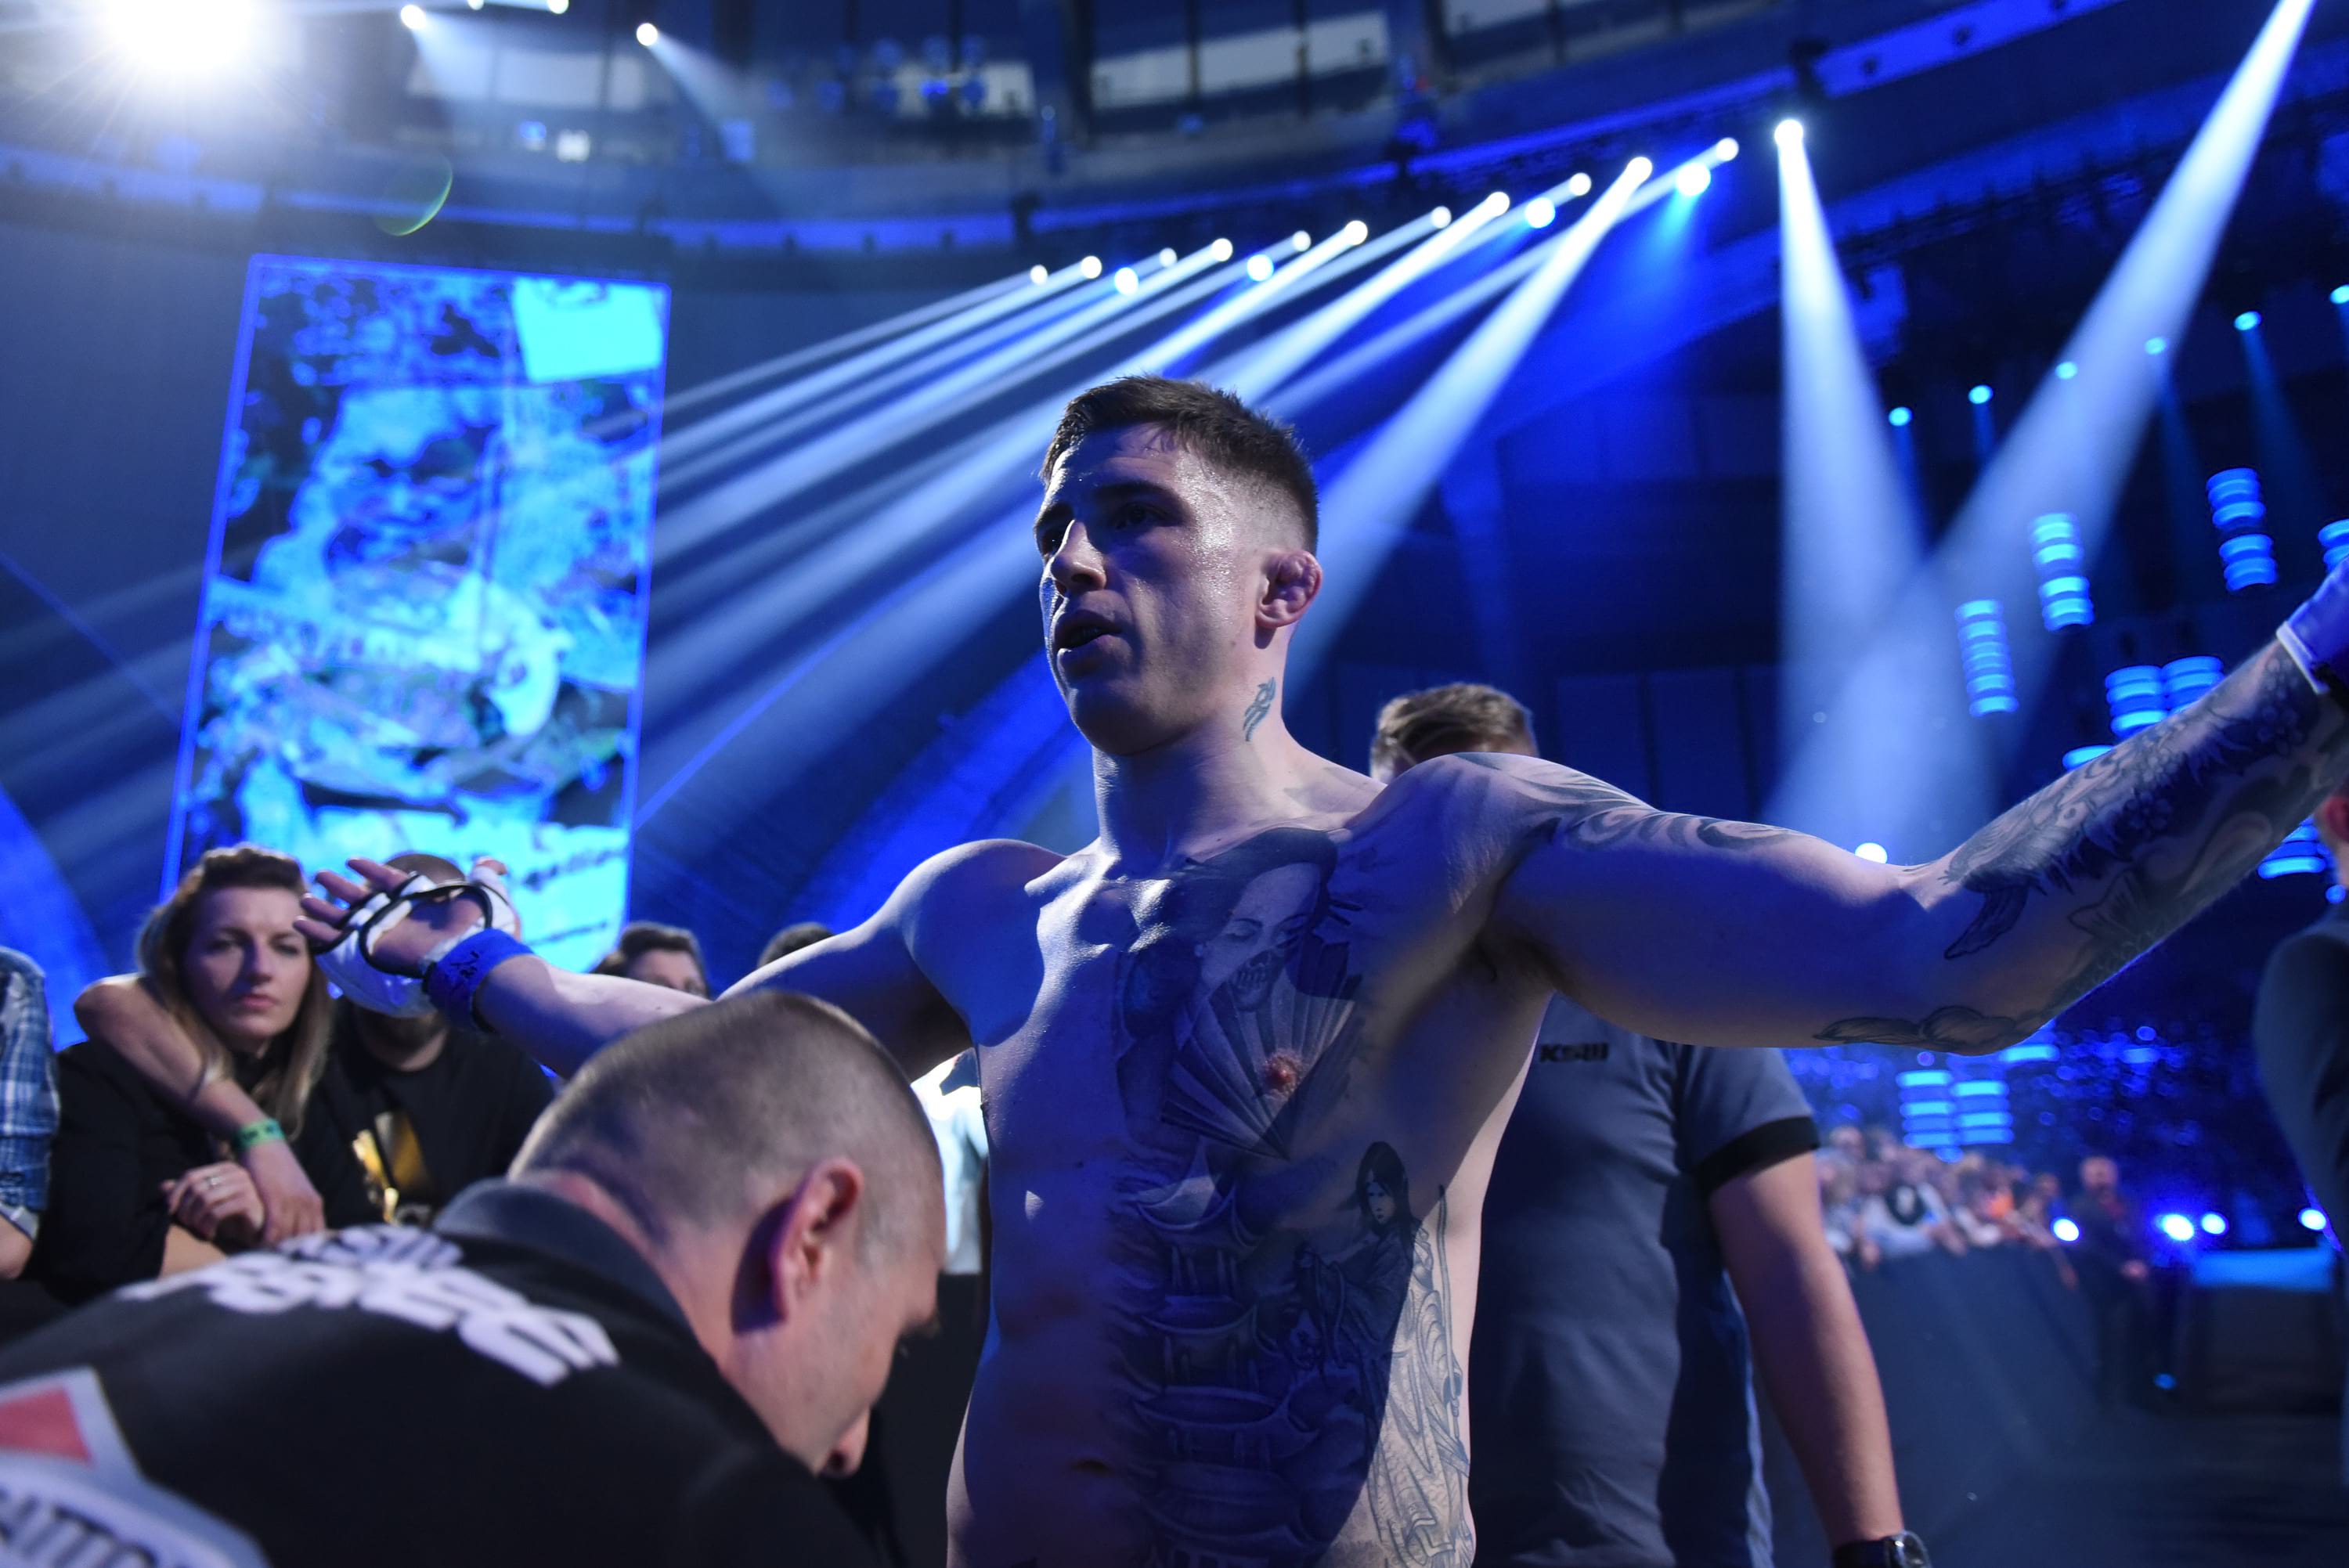 Norman Parke will be fighting for the interim KSW lightweight championship at KSW 50 in London